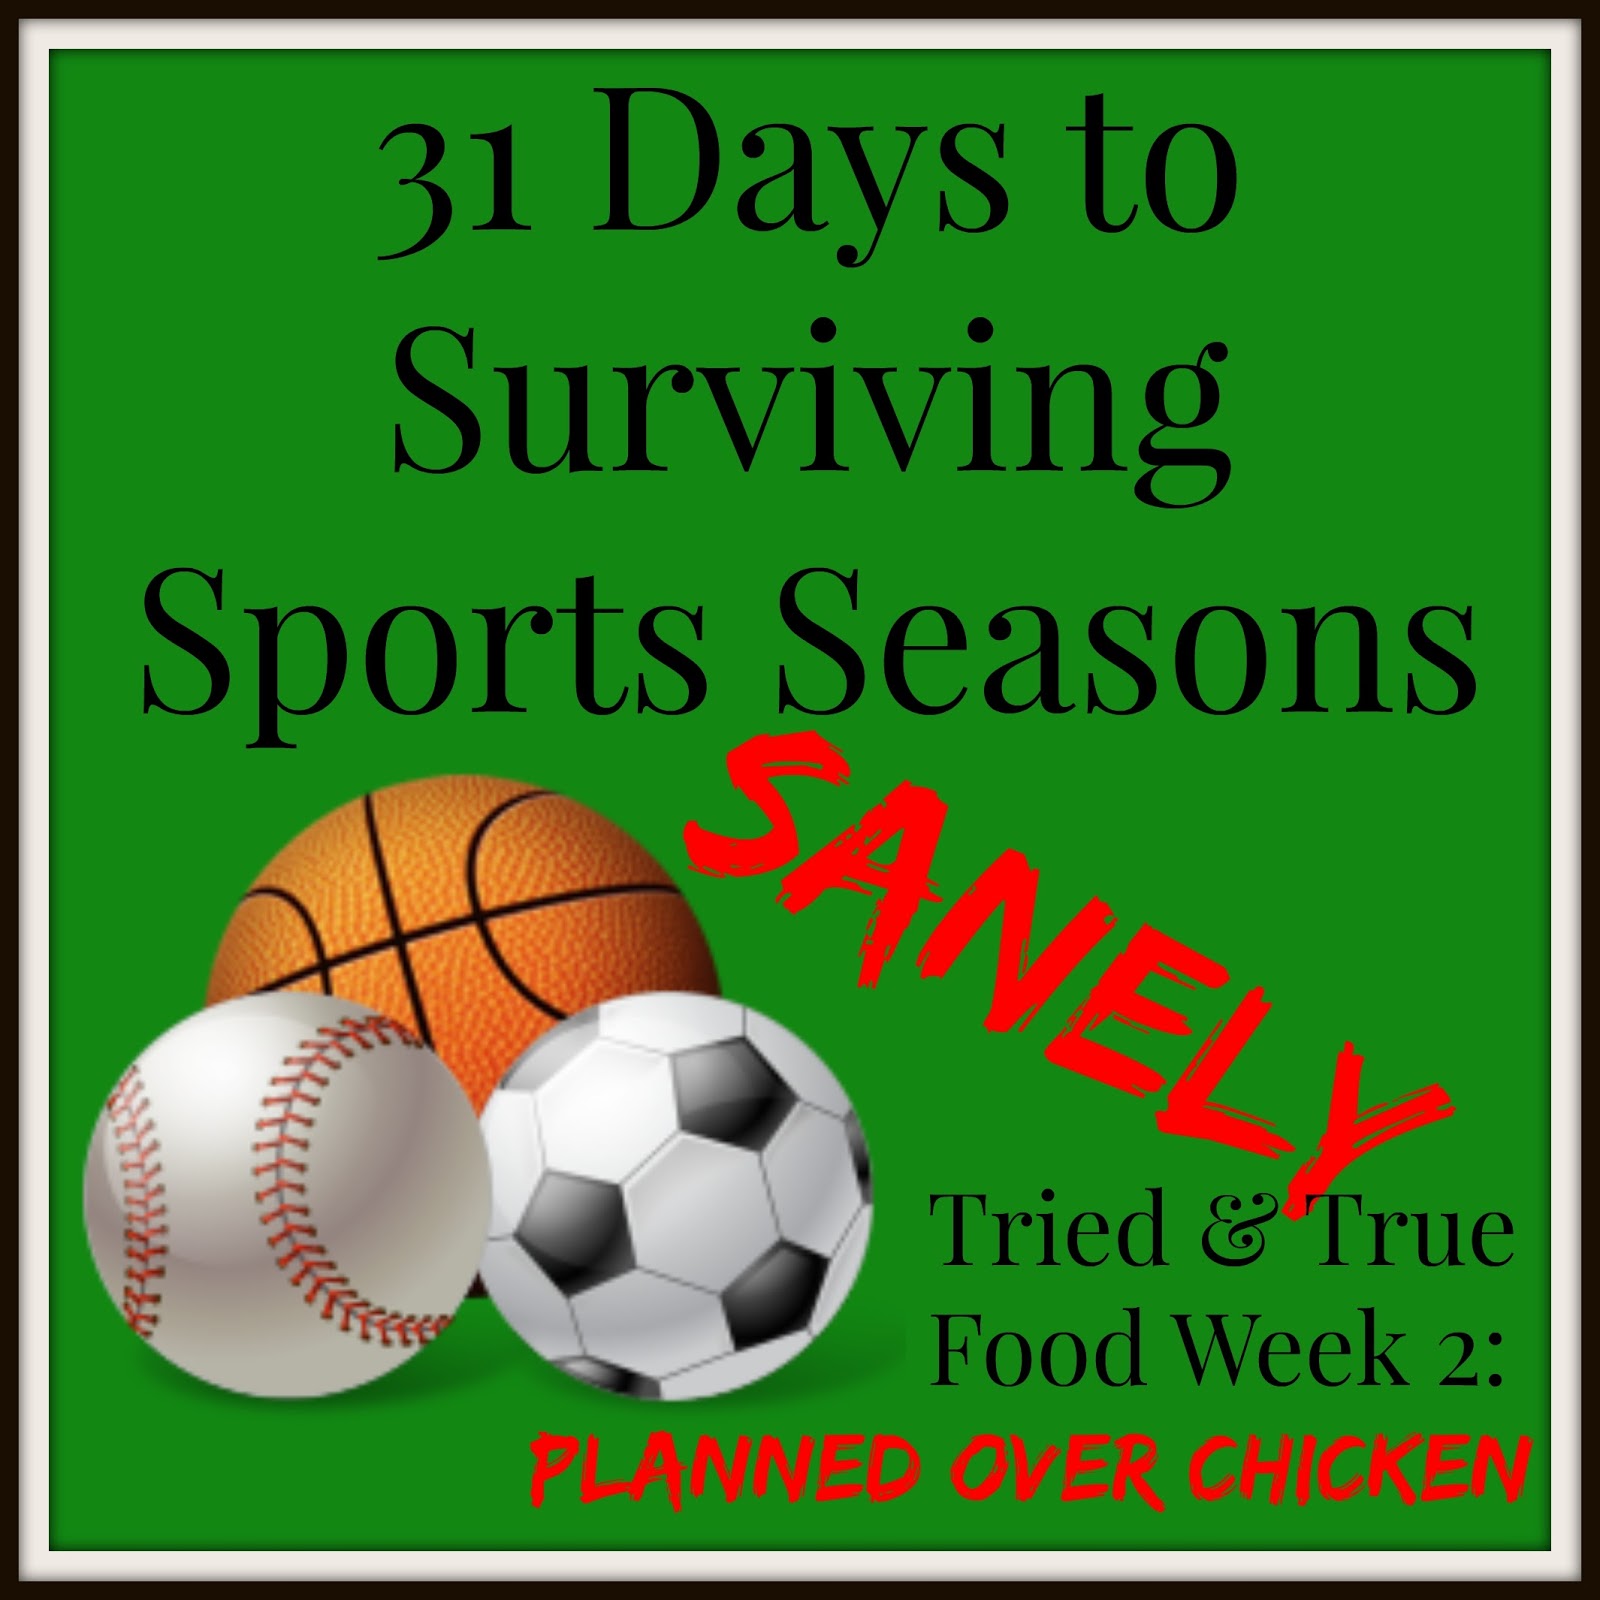 31 Days to Surviving Sports Seasons Sanely: Planned Over Chicken